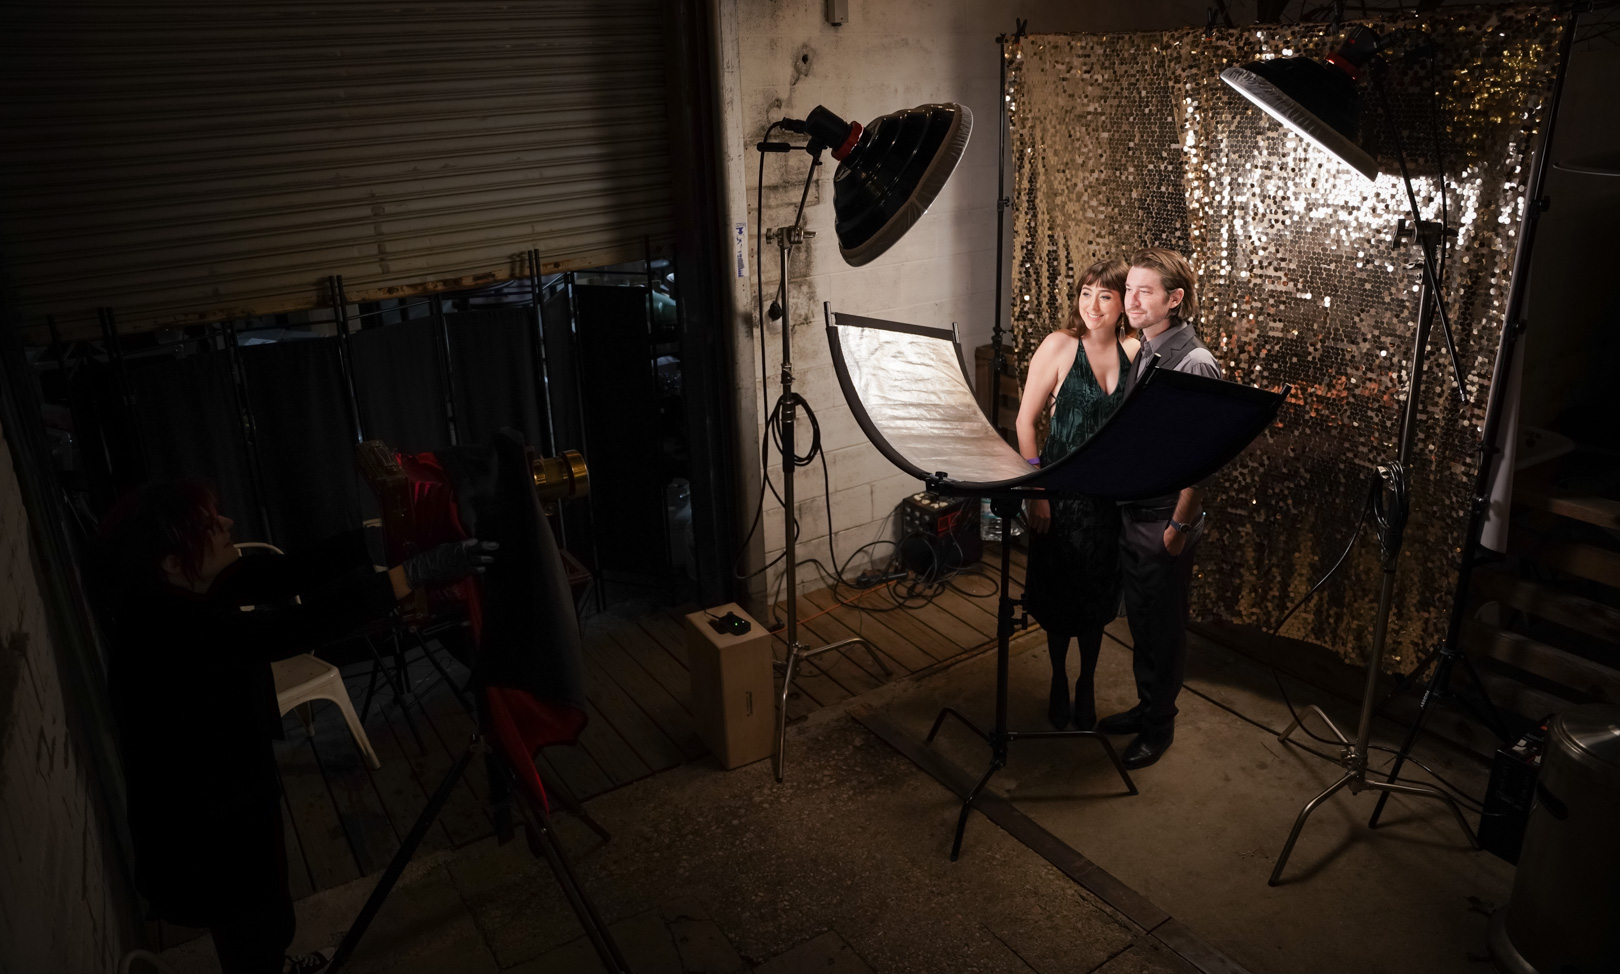 A photo booth with a a backdrop, lighting and a large vintagecamera